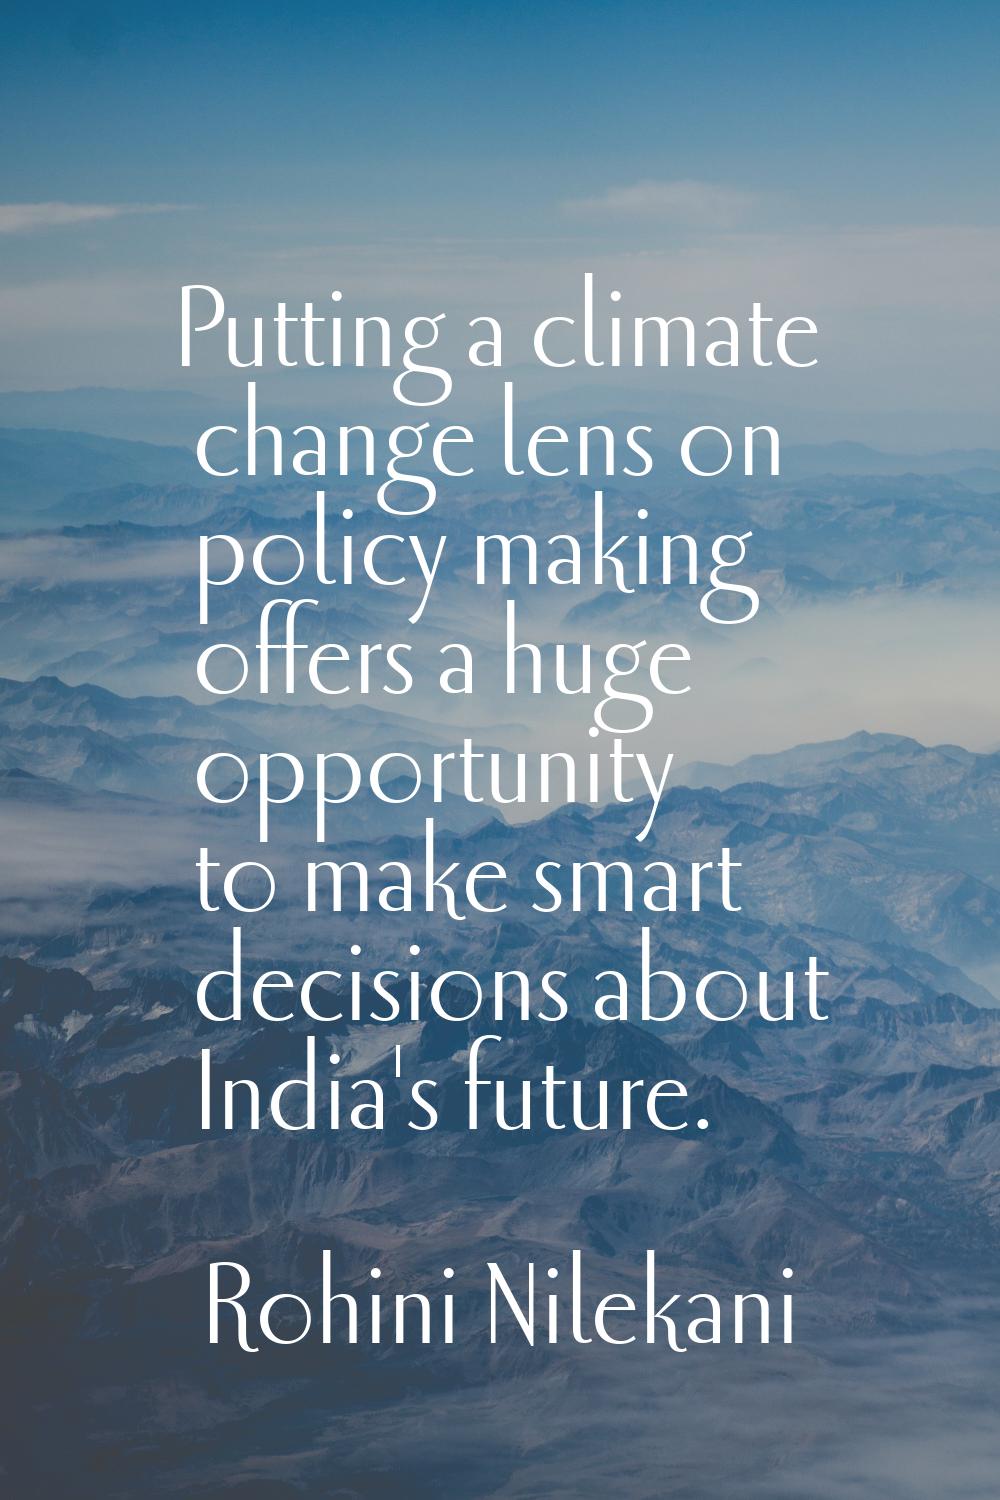 Putting a climate change lens on policy making offers a huge opportunity to make smart decisions ab